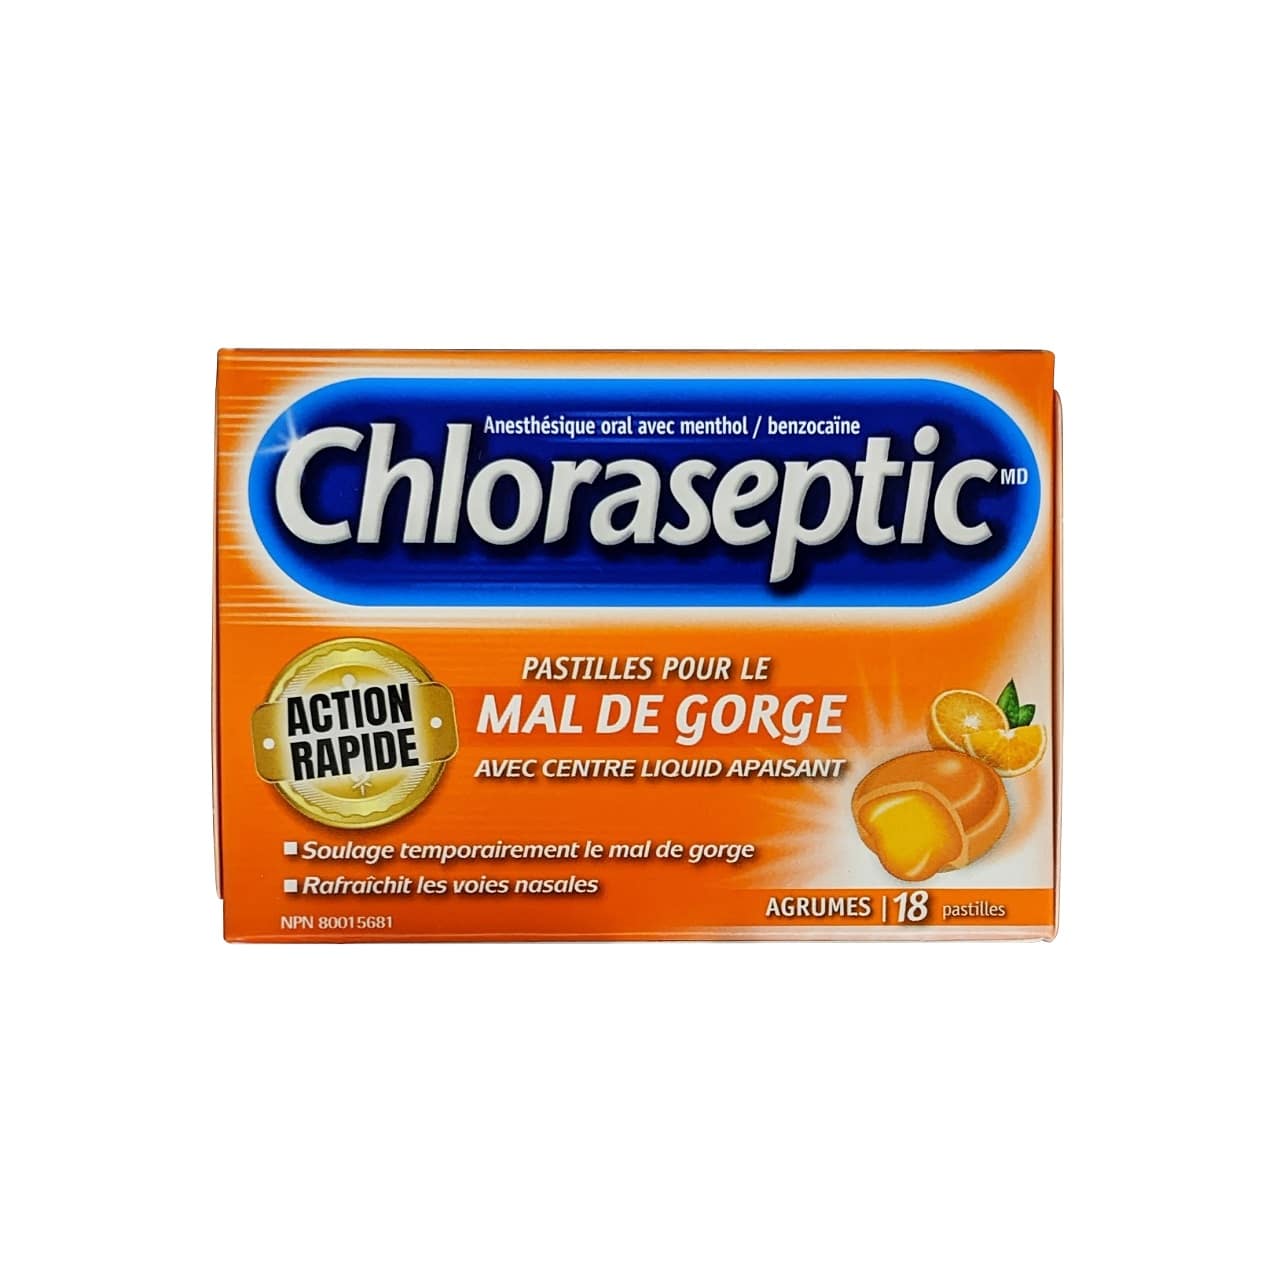 Product label for Chloraseptic Methol/Benzocaine Oral Anesthetic Lozenges Citrus Flavour (18 lozenges) in French